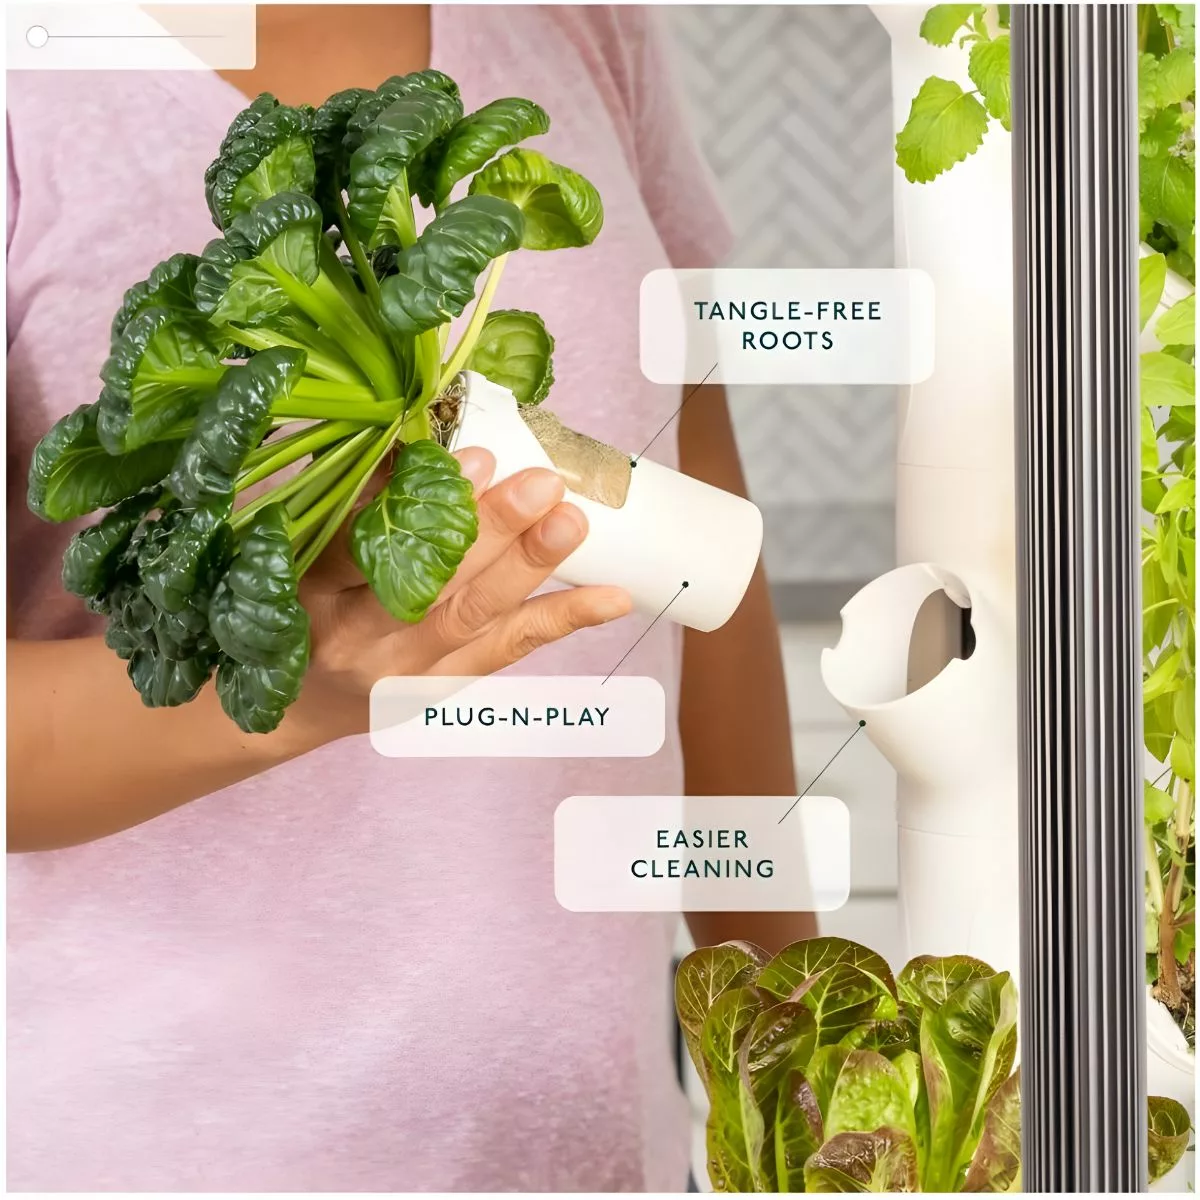 The Best Hydroponic Growing System